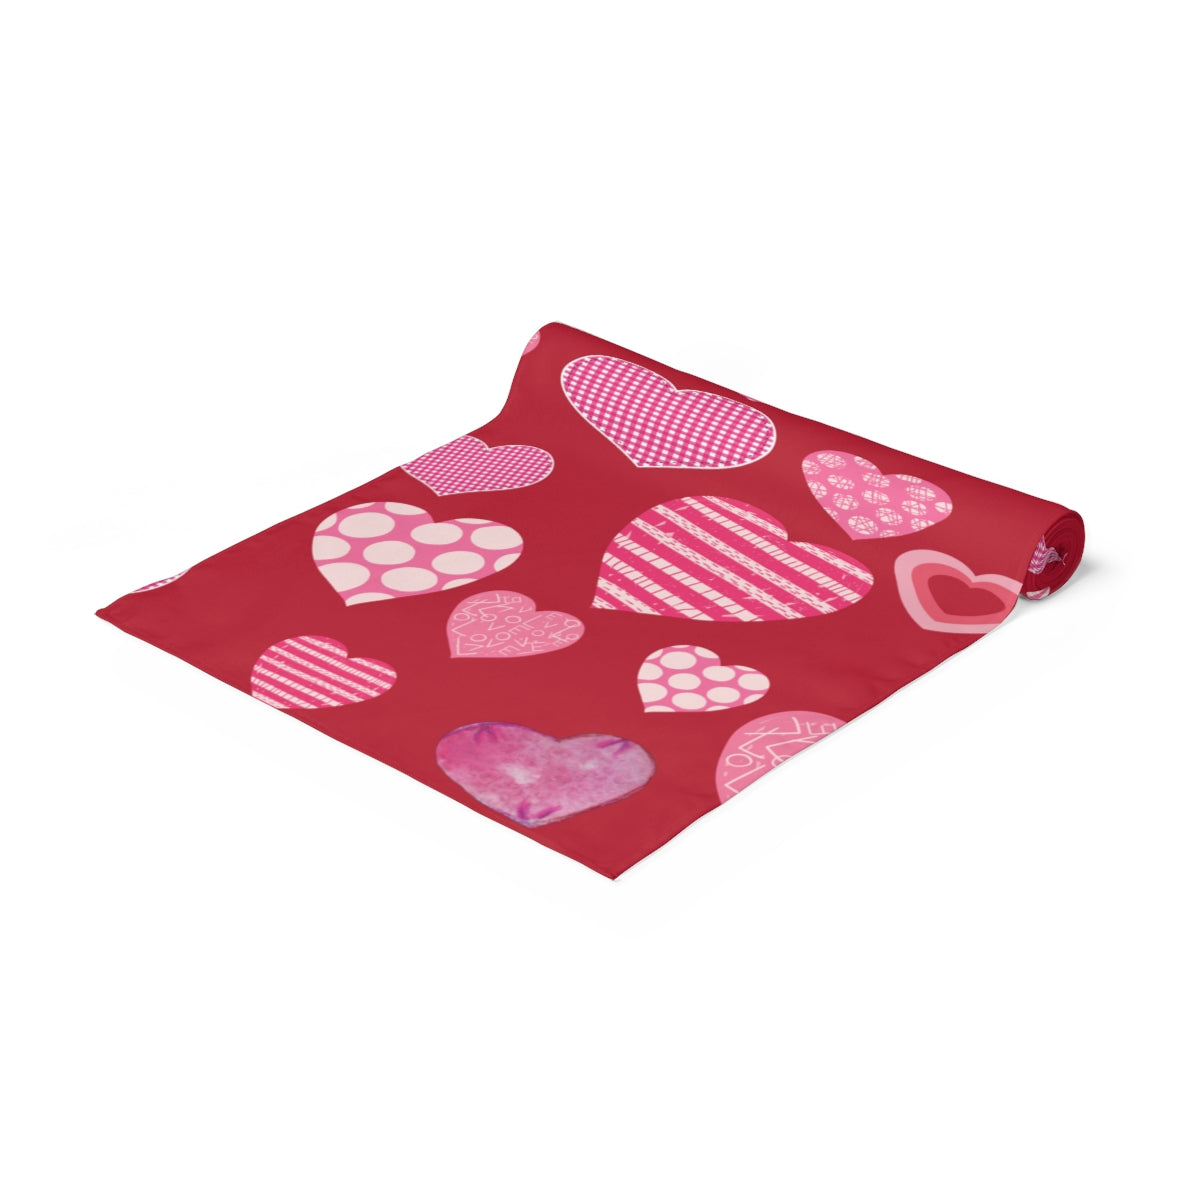 Valentines Day Table Runner / Red Valentines Day Decor / Heart Table Runner